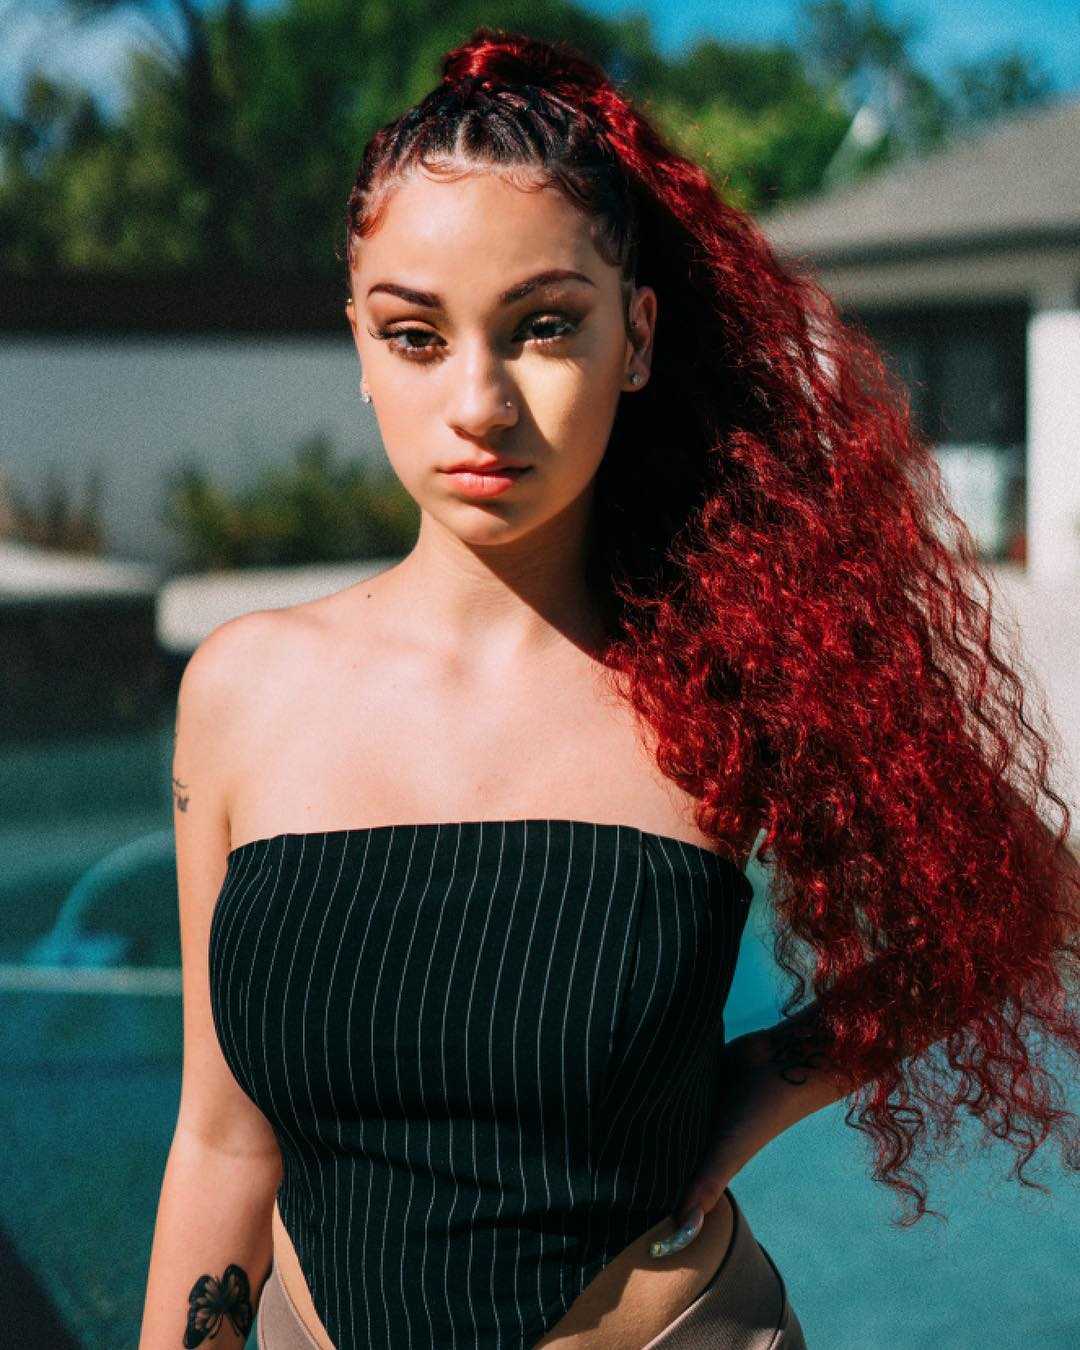 70+ Hot Pictures Of Danielle Bregoli aka Bhad Bhabie Which Will Win Your Heart 57